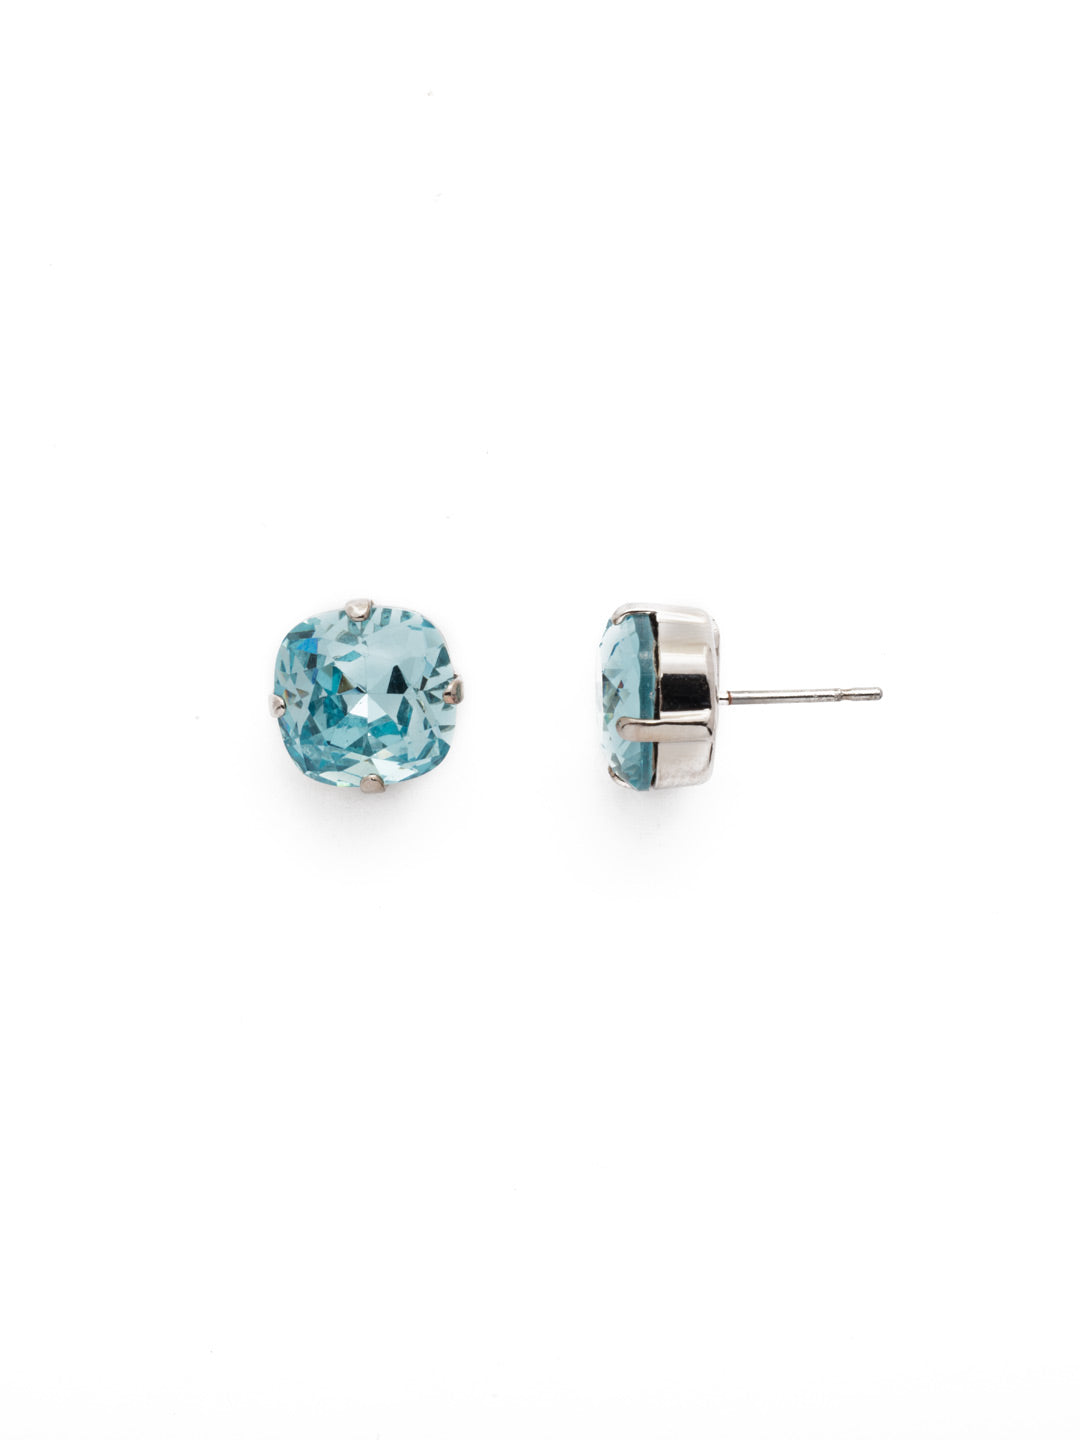 Halcyon Stud Earrings - EDH25RHAQU - <p>A beautiful, luminous cushion-cut crystal in a classic four-pronged setting that's ideal for everyday wear. From Sorrelli's Aquamarine collection in our Palladium Silver-tone finish.</p>